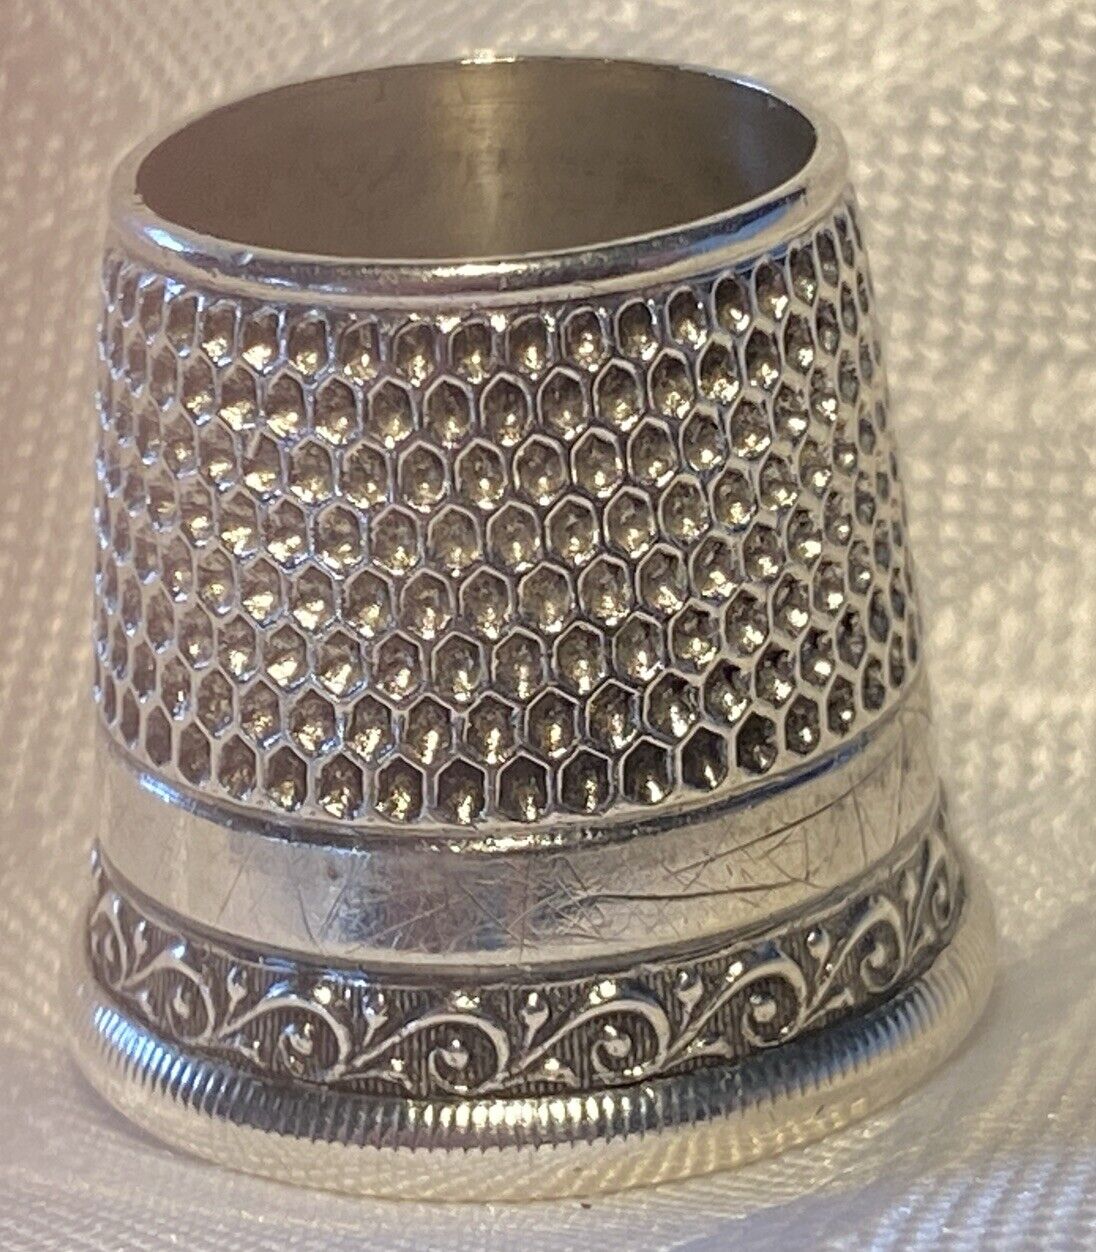 Vtg Sterling Silver #11 Tailor's Open Top Thimble W/Scrolls Decoration  5. Grams